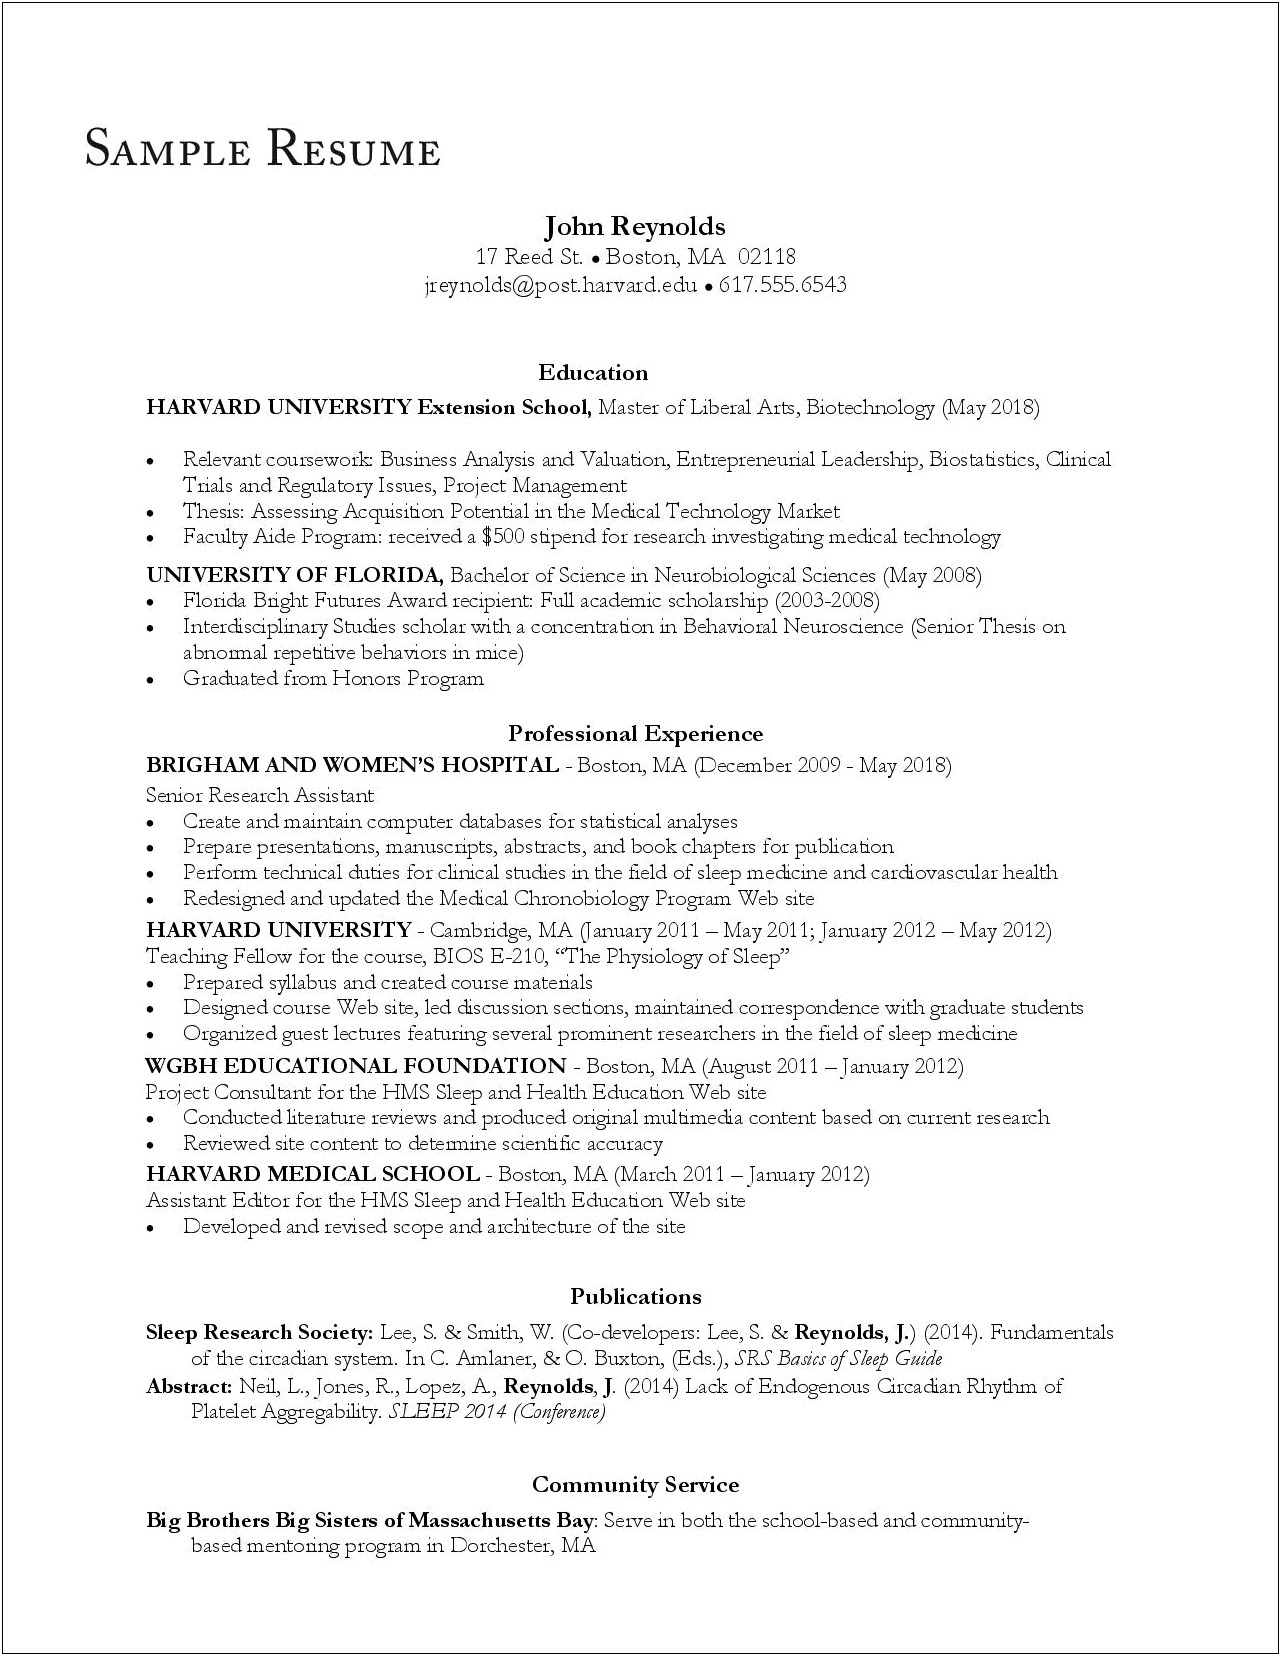 Harvard Extension School Resumes And Cover Letters